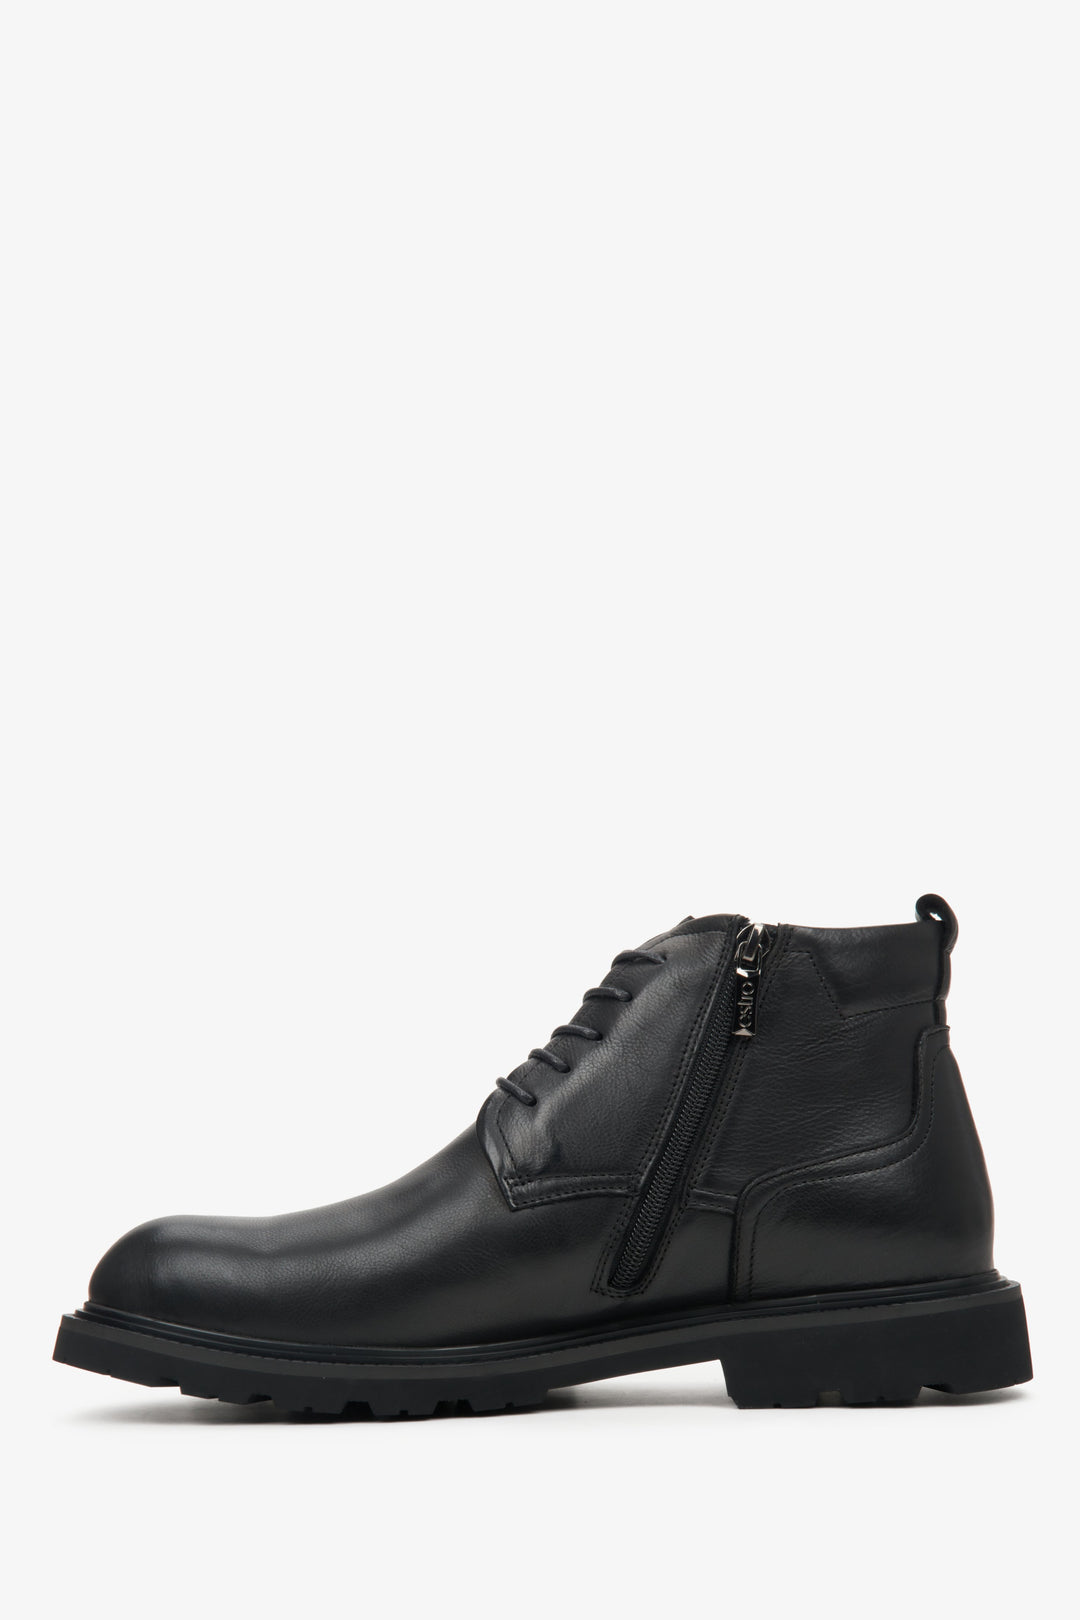 Men's black winter shoes made of genuine leather by Estro - shoe profile.